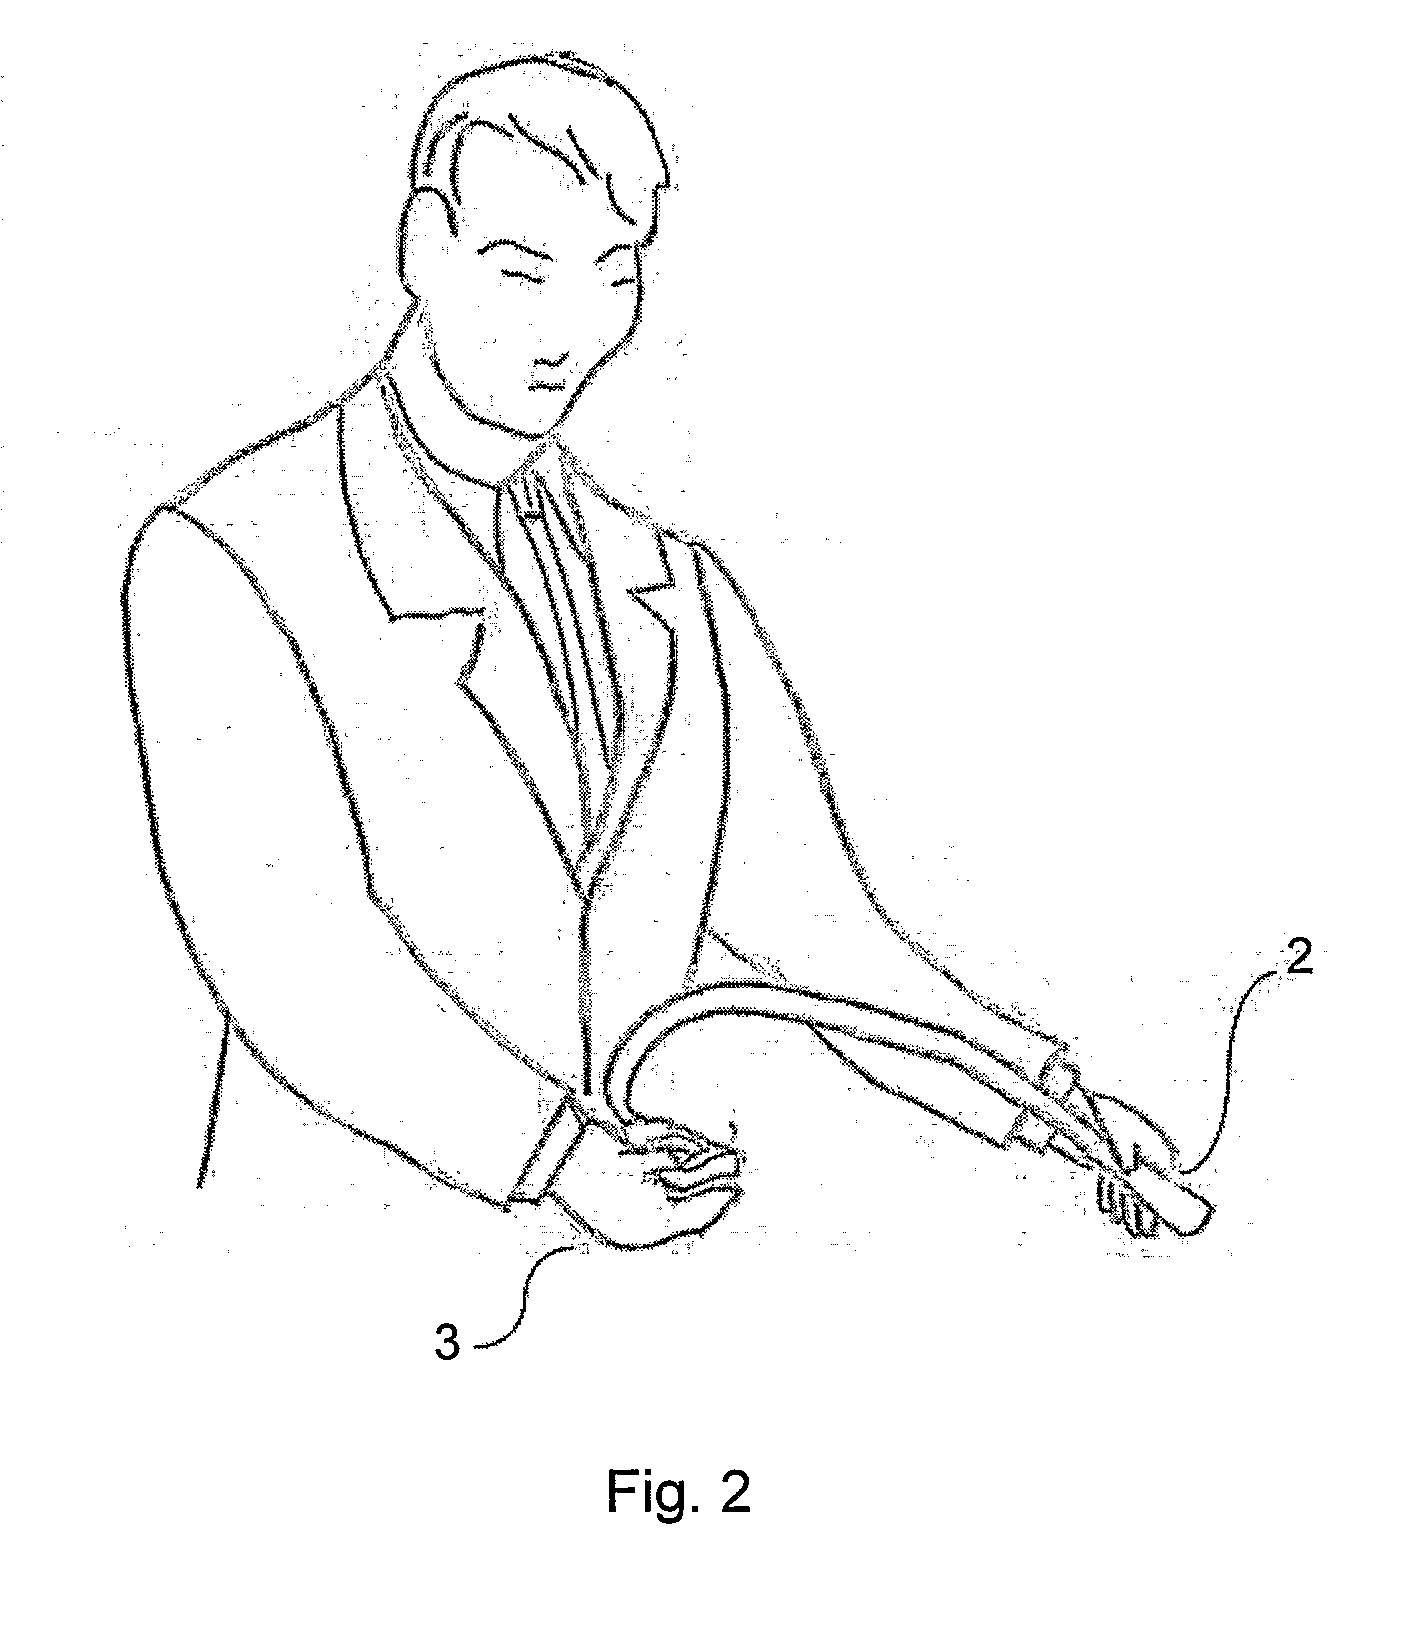 Ultrasound Measurement System and Method